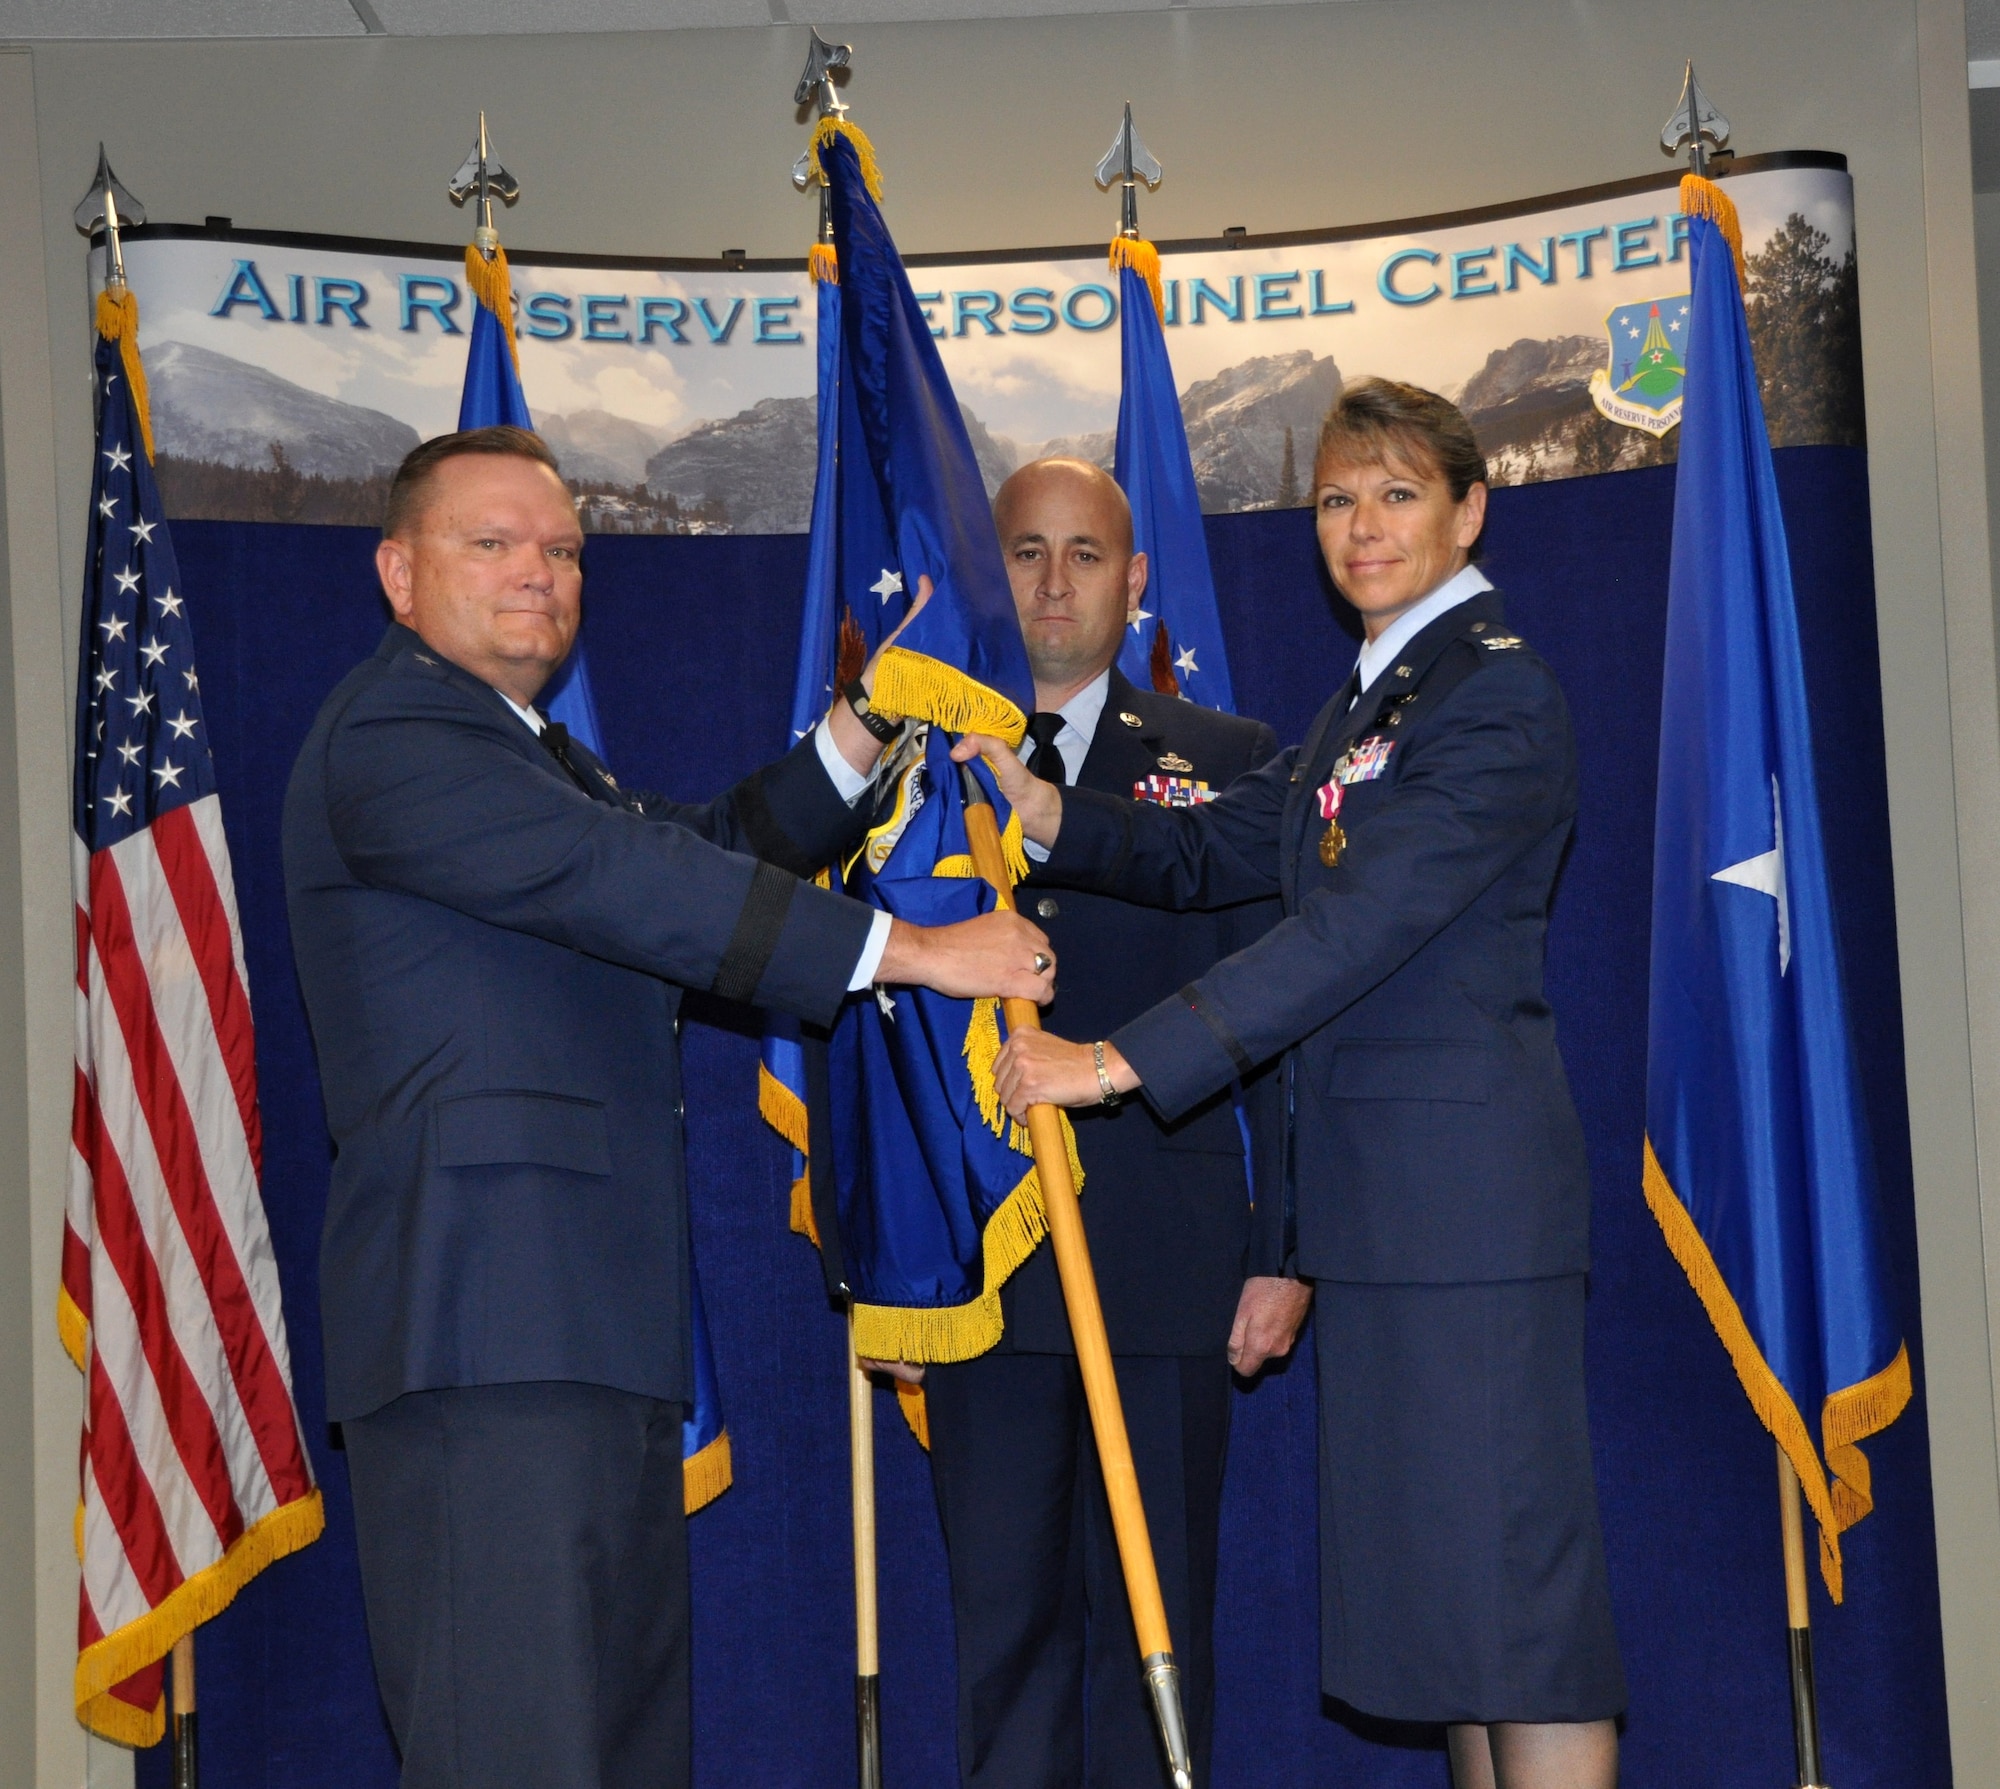 Brig. Gen. Samuel "Bo" Mahaney, Air Reserve Personnel Center commander, hands the Headquarters Individual Reservist Readiness and Integration Organization flag to Col. Carolyn Stickell, incoming HQ RIO commander, as Master Sgt. Jerrod Kester, HQ RIO first sergeant, stands by during an assumption of command ceremony held June 24, 2015, on Buckley Air Force Base, Colo. Stickell replaced outgoing HQ RIO commander Col. Christopher Cronce, following his move to the Pentagon, where he is now the deputy director for Reserve Personnel. Stickell became the second commander of HQ RIO since its activation Oct. 28, 2014. (U.S. Air Force photo/Tech. Sgt. Rob Hazelett)